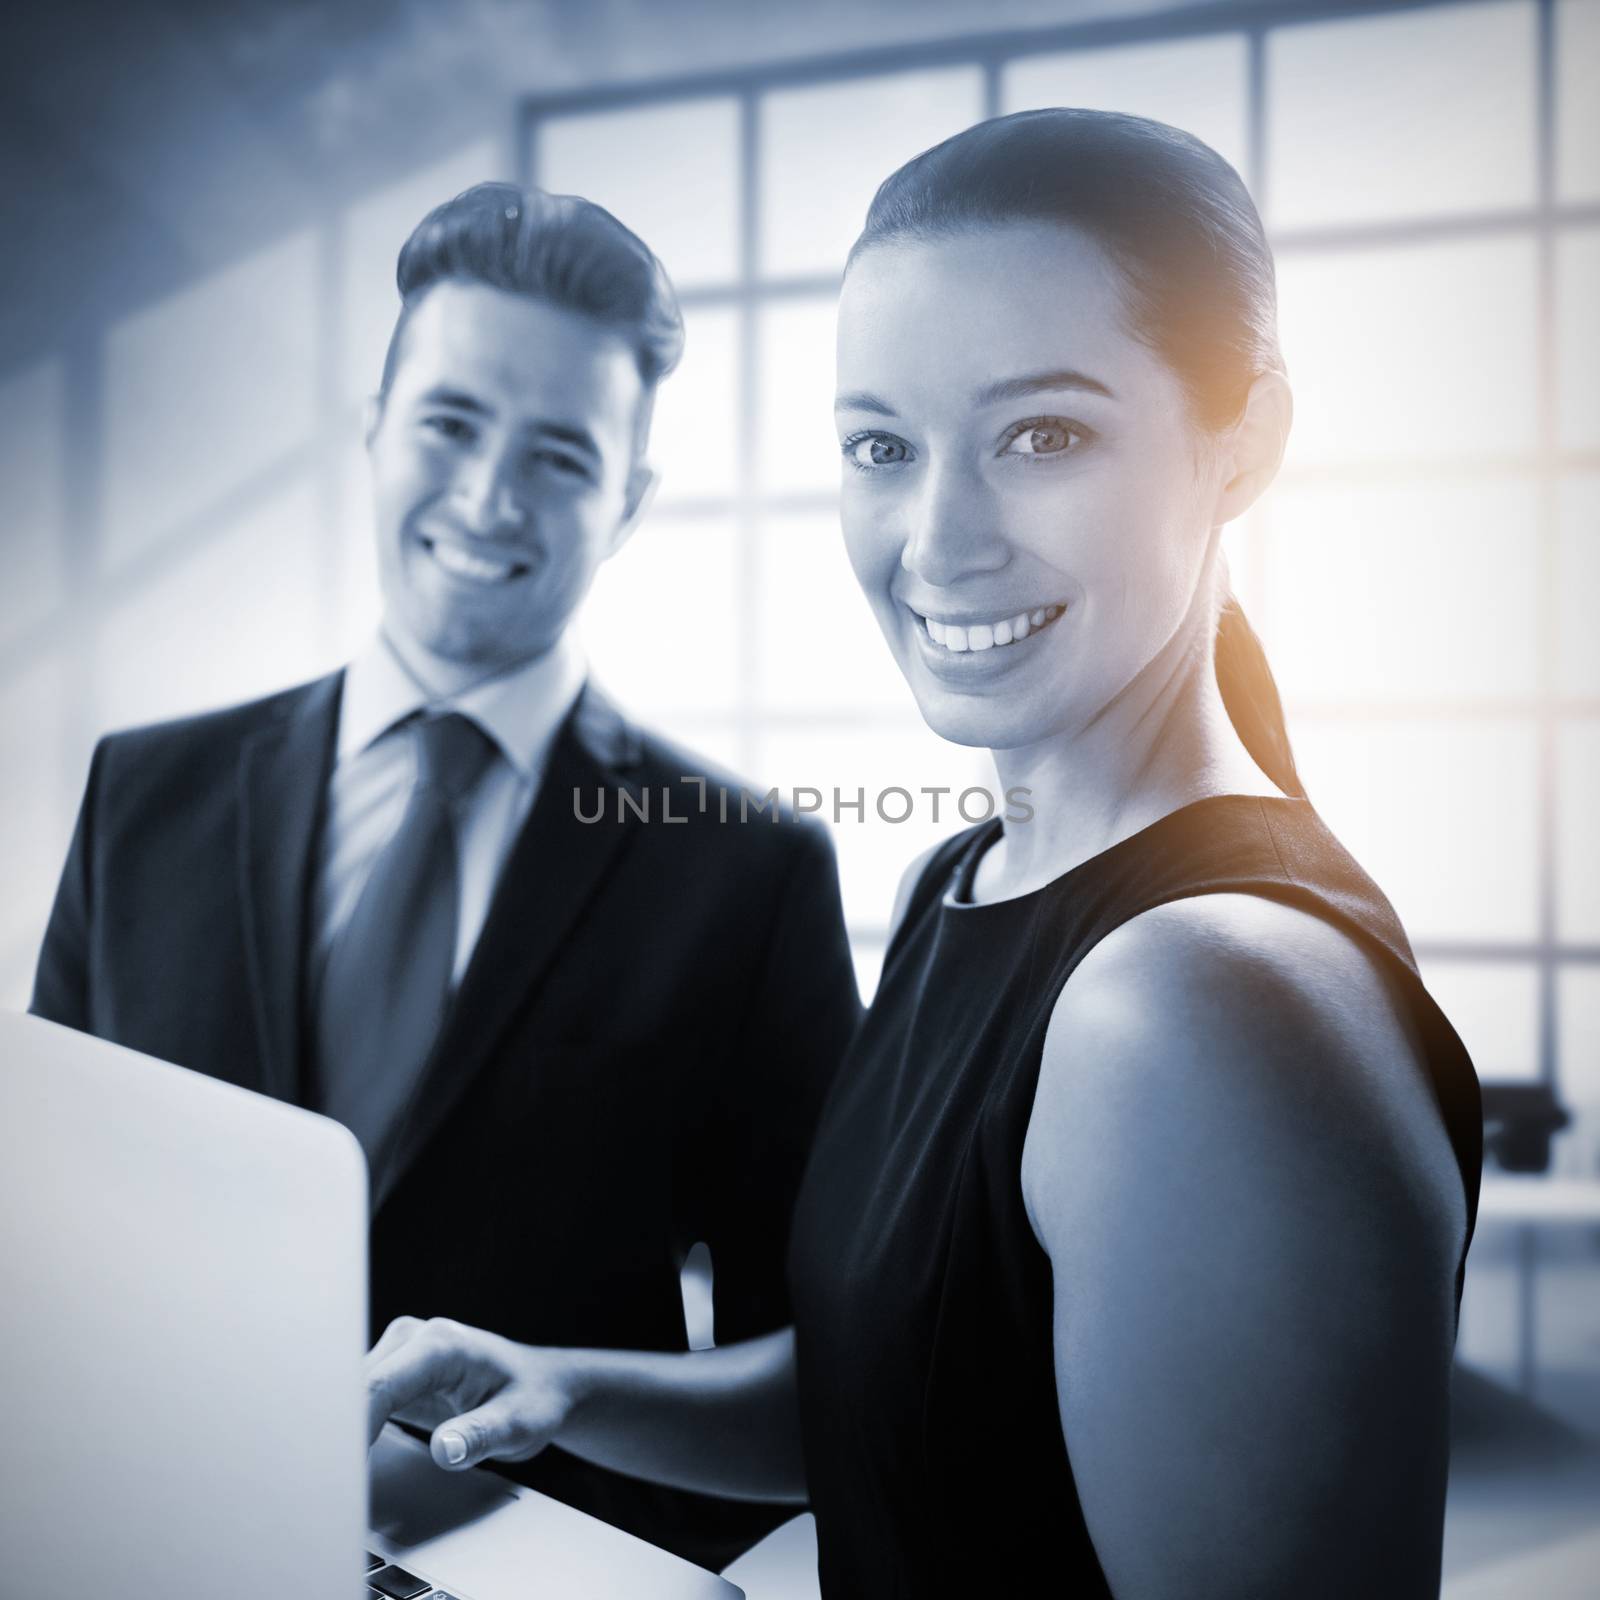 Business people standing with a laptop against interior of empty office